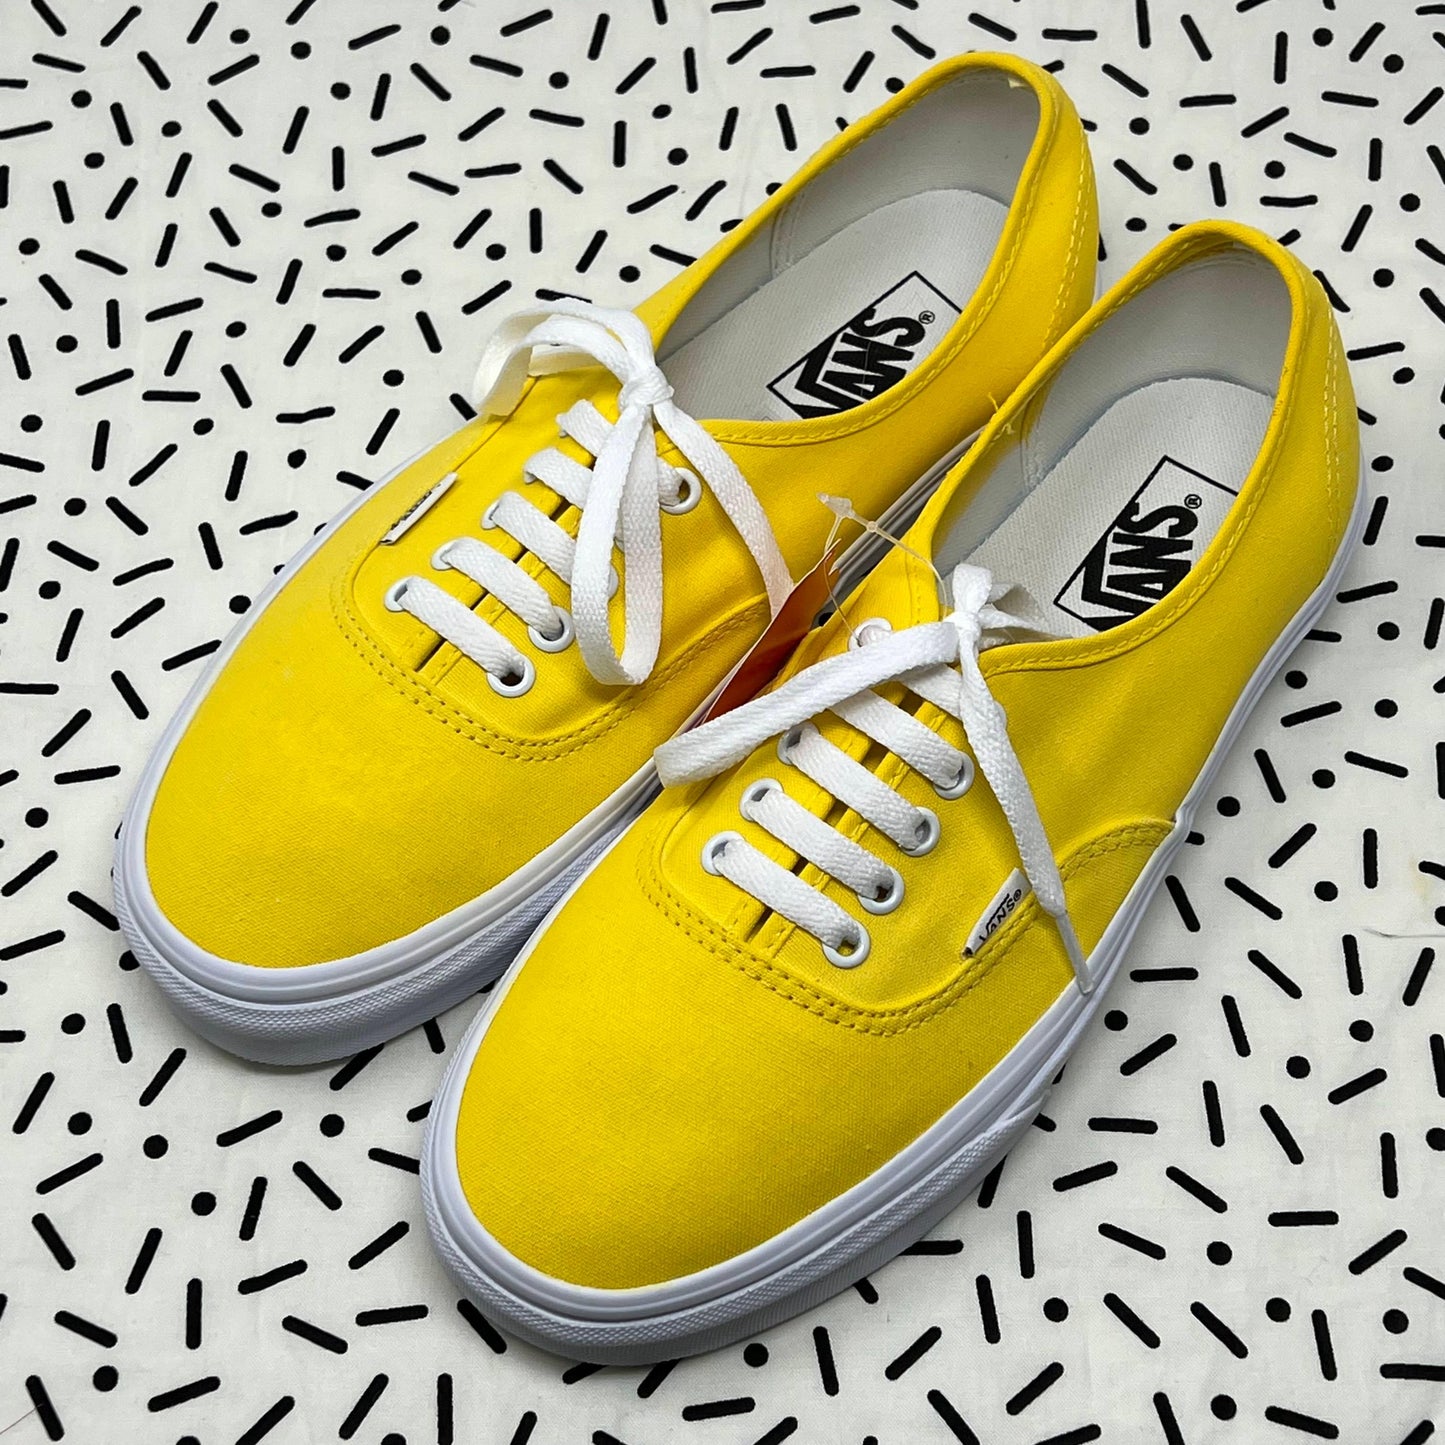 Yellow Laced Authentic Vans with a black sprinkle background